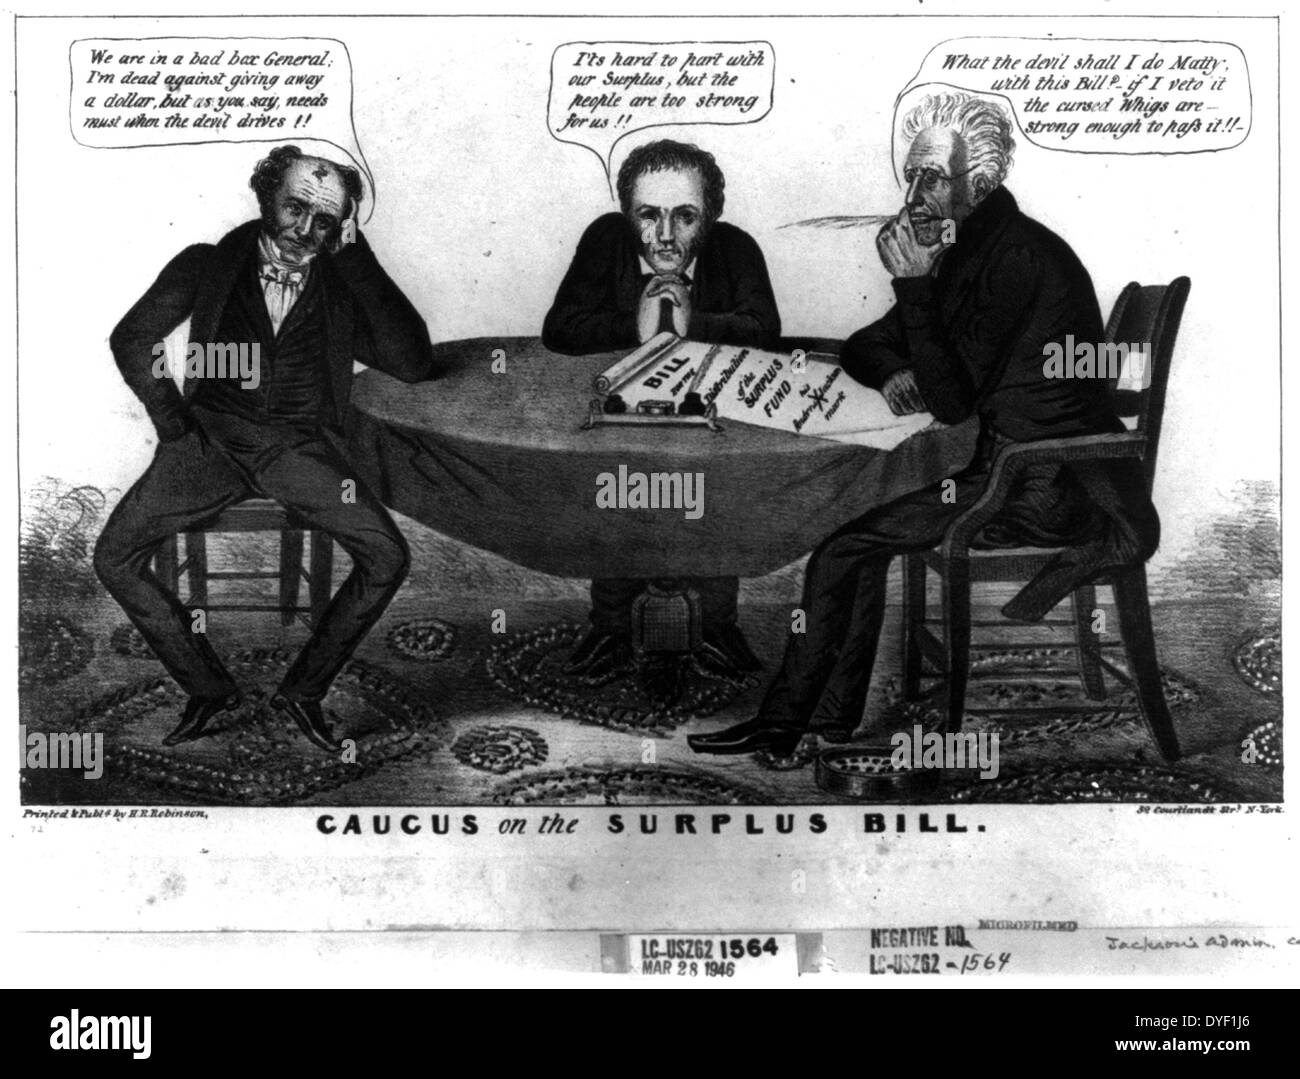 Caucus on the Surplus Bill, political cartoon satirising Andrew Jackson's reluctant endorsement of the Distribution Act, or 'Surplus Bill'. Jackson sits at a table with vice President Van Buren and his running mate discussing their predicament. Created by H.R. Robinson in 1836. Stock Photo